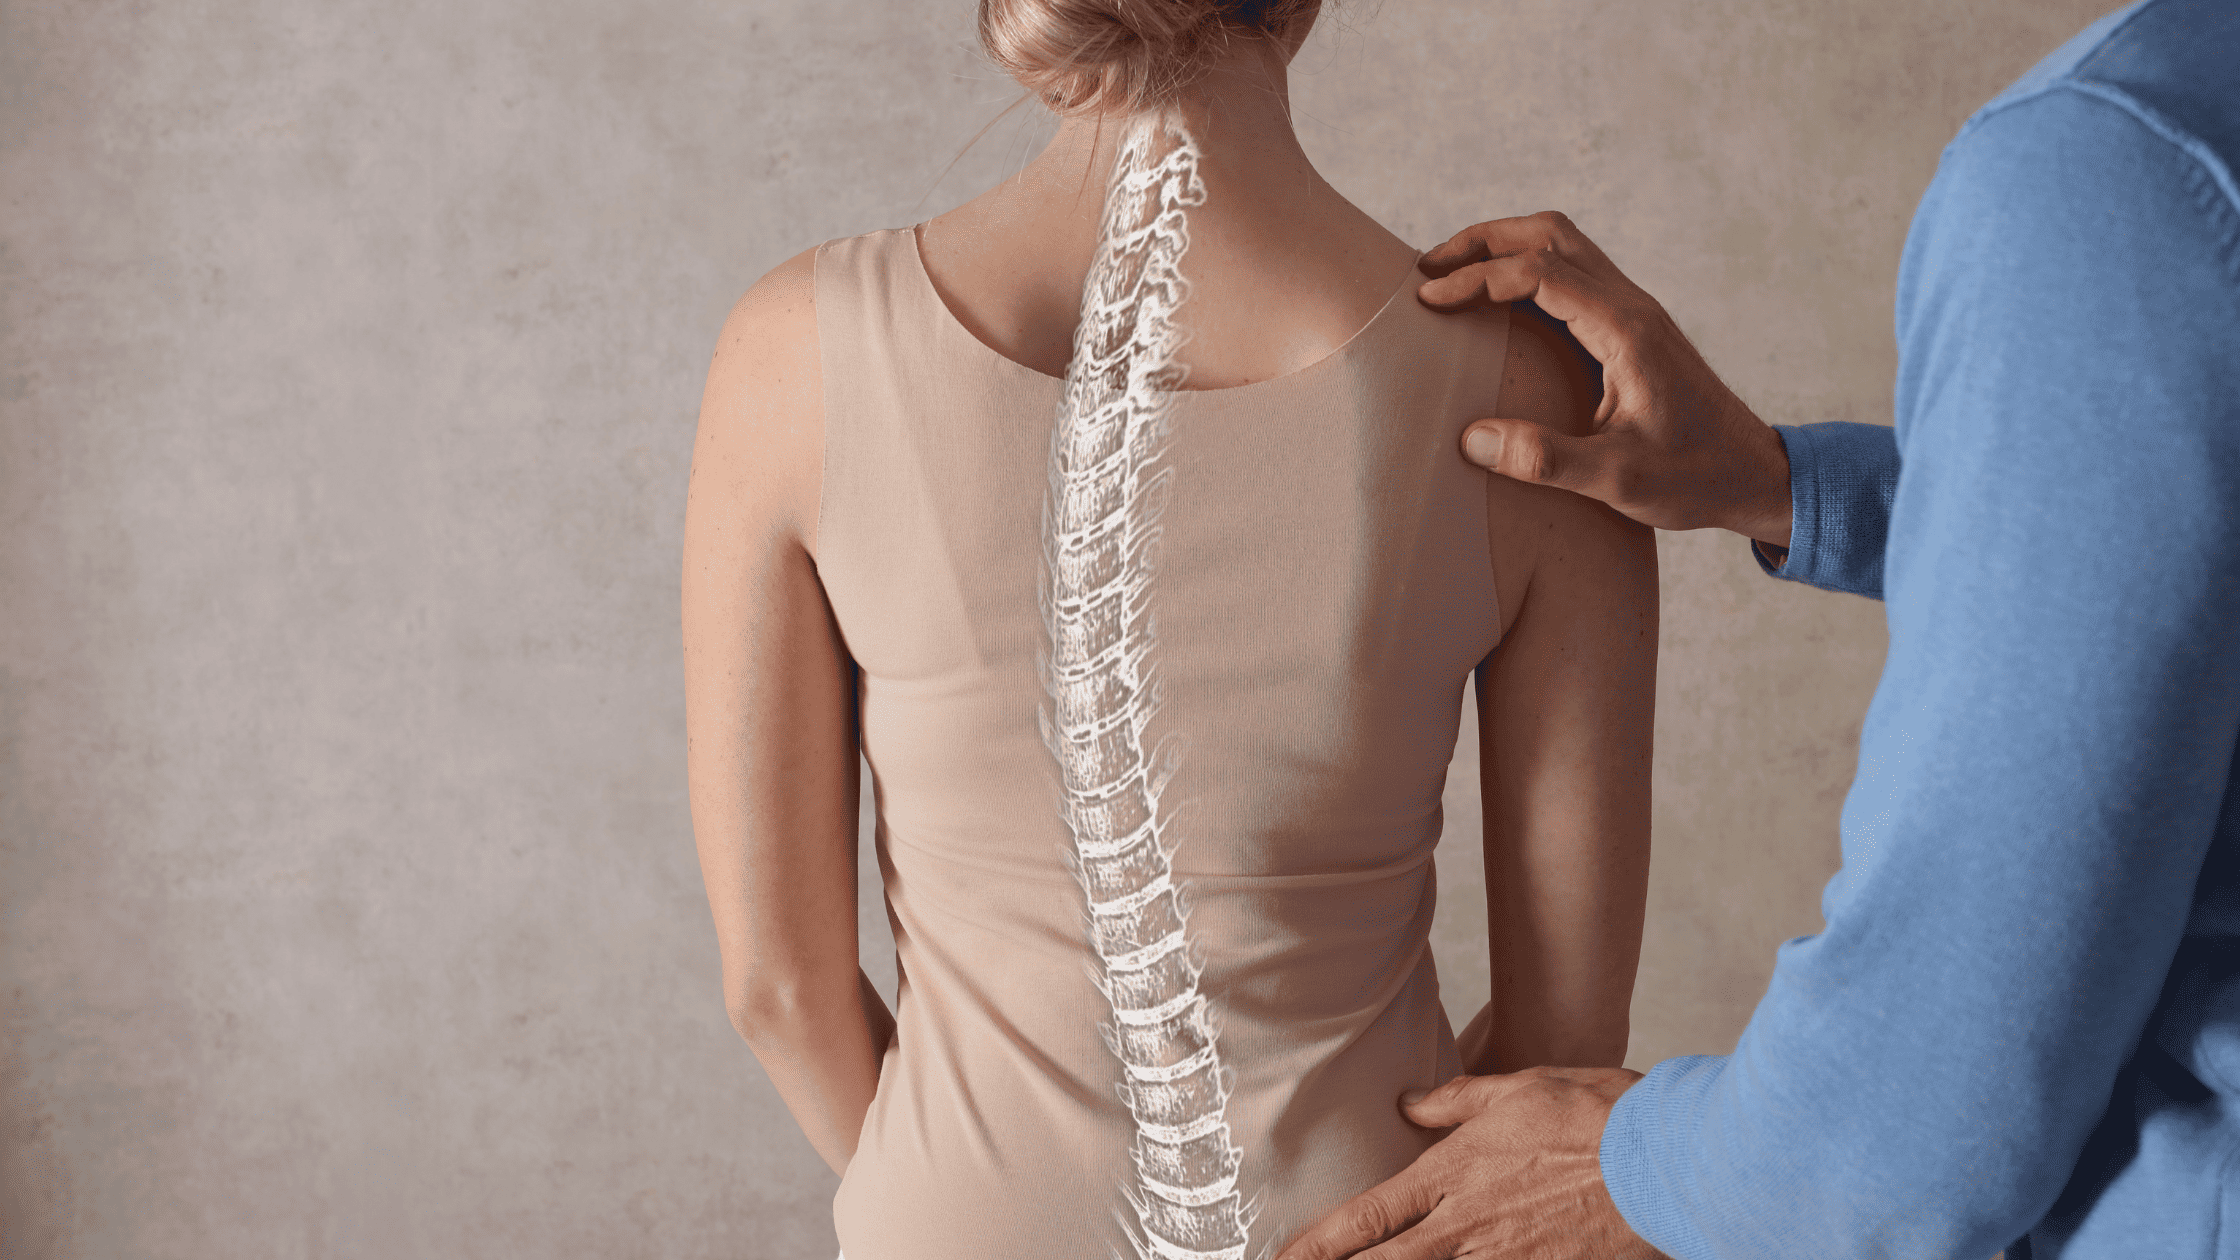 Can Scoliosis Come Back After Surgery?